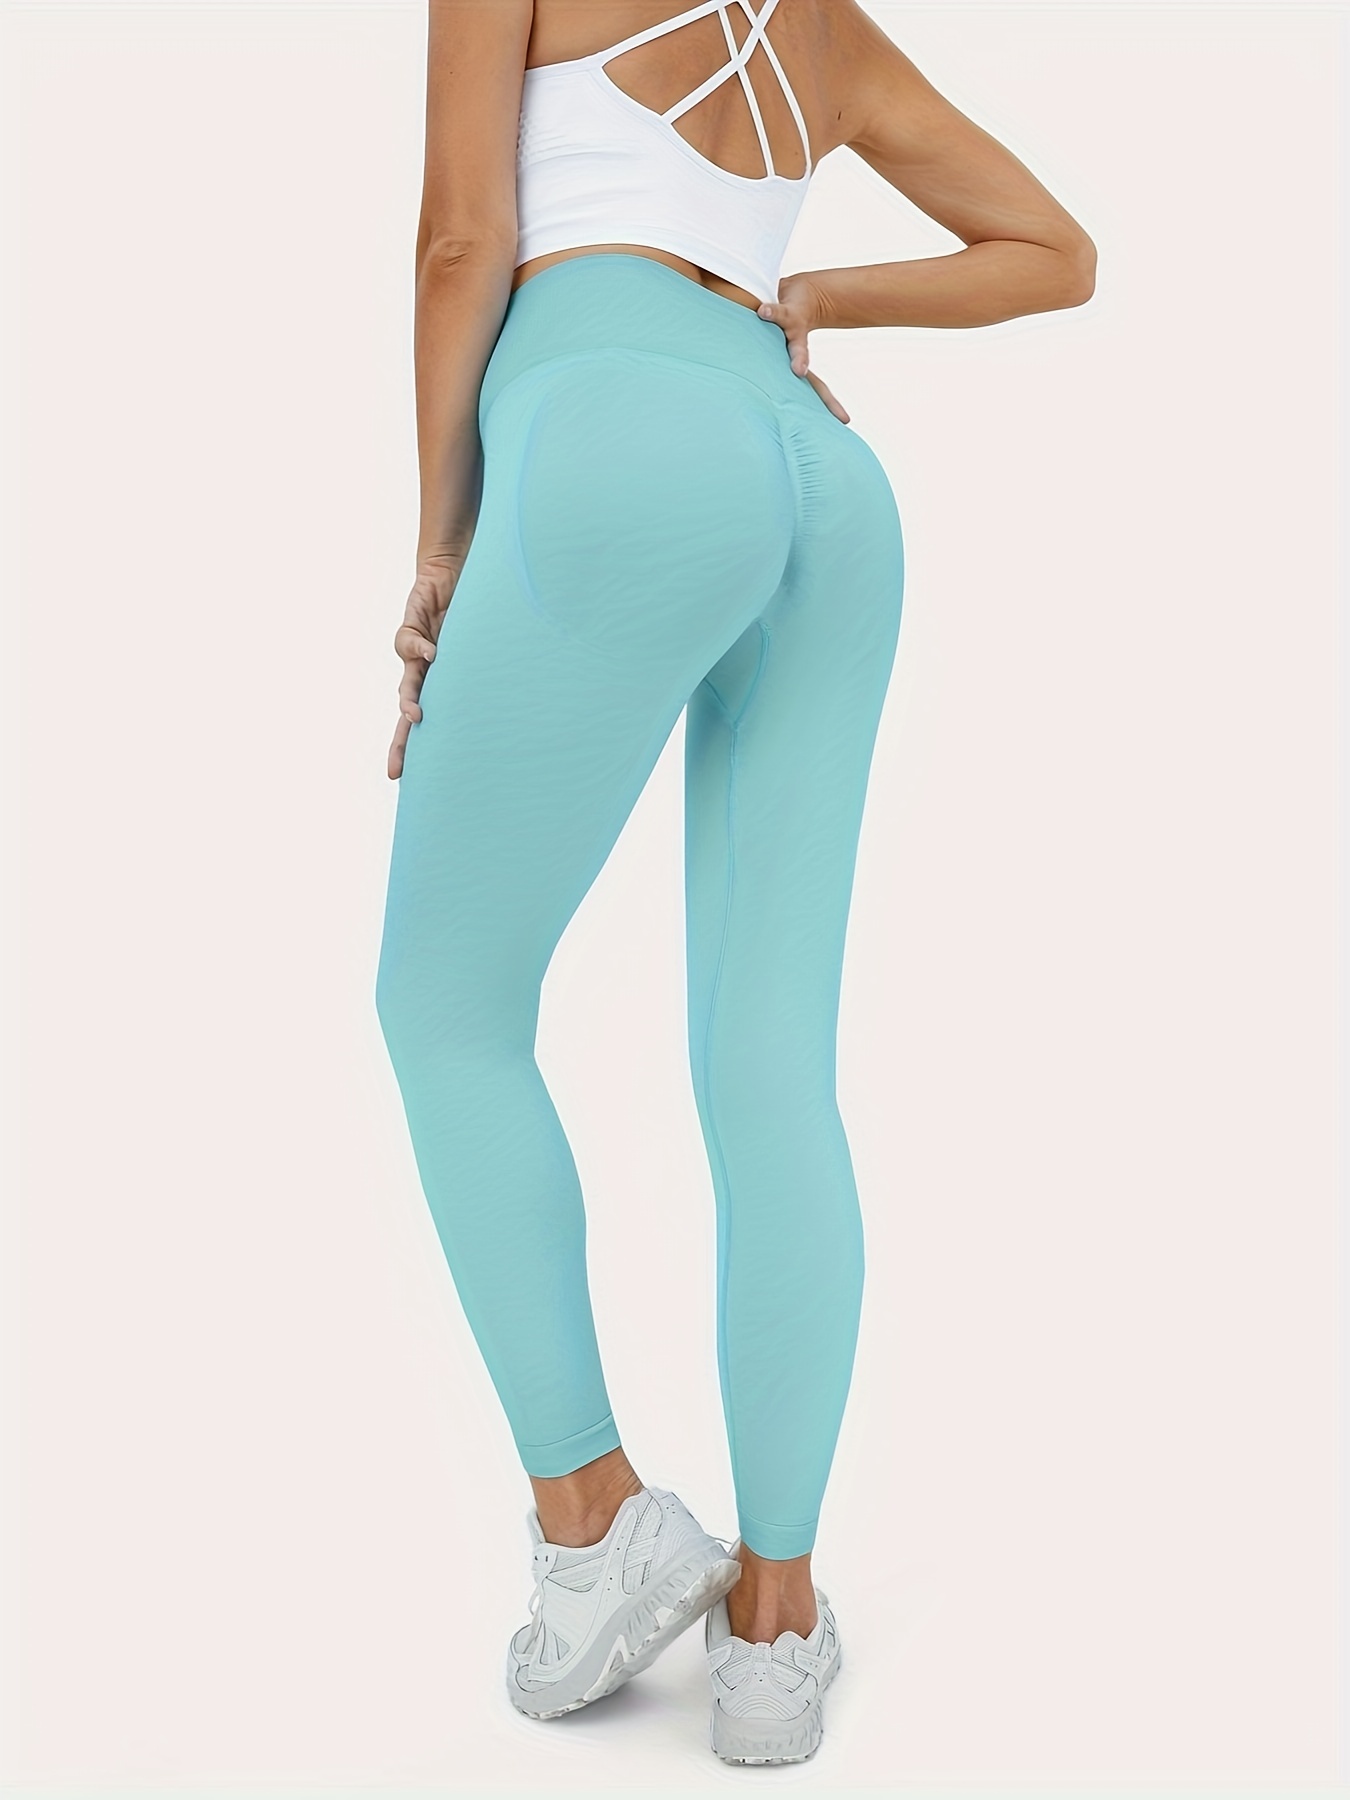 Solid Booty Scrunch Running Sports Pants, Seamless High Stretchy Hip  Lifting Yoga Fitness Leggings, Women's Activewear